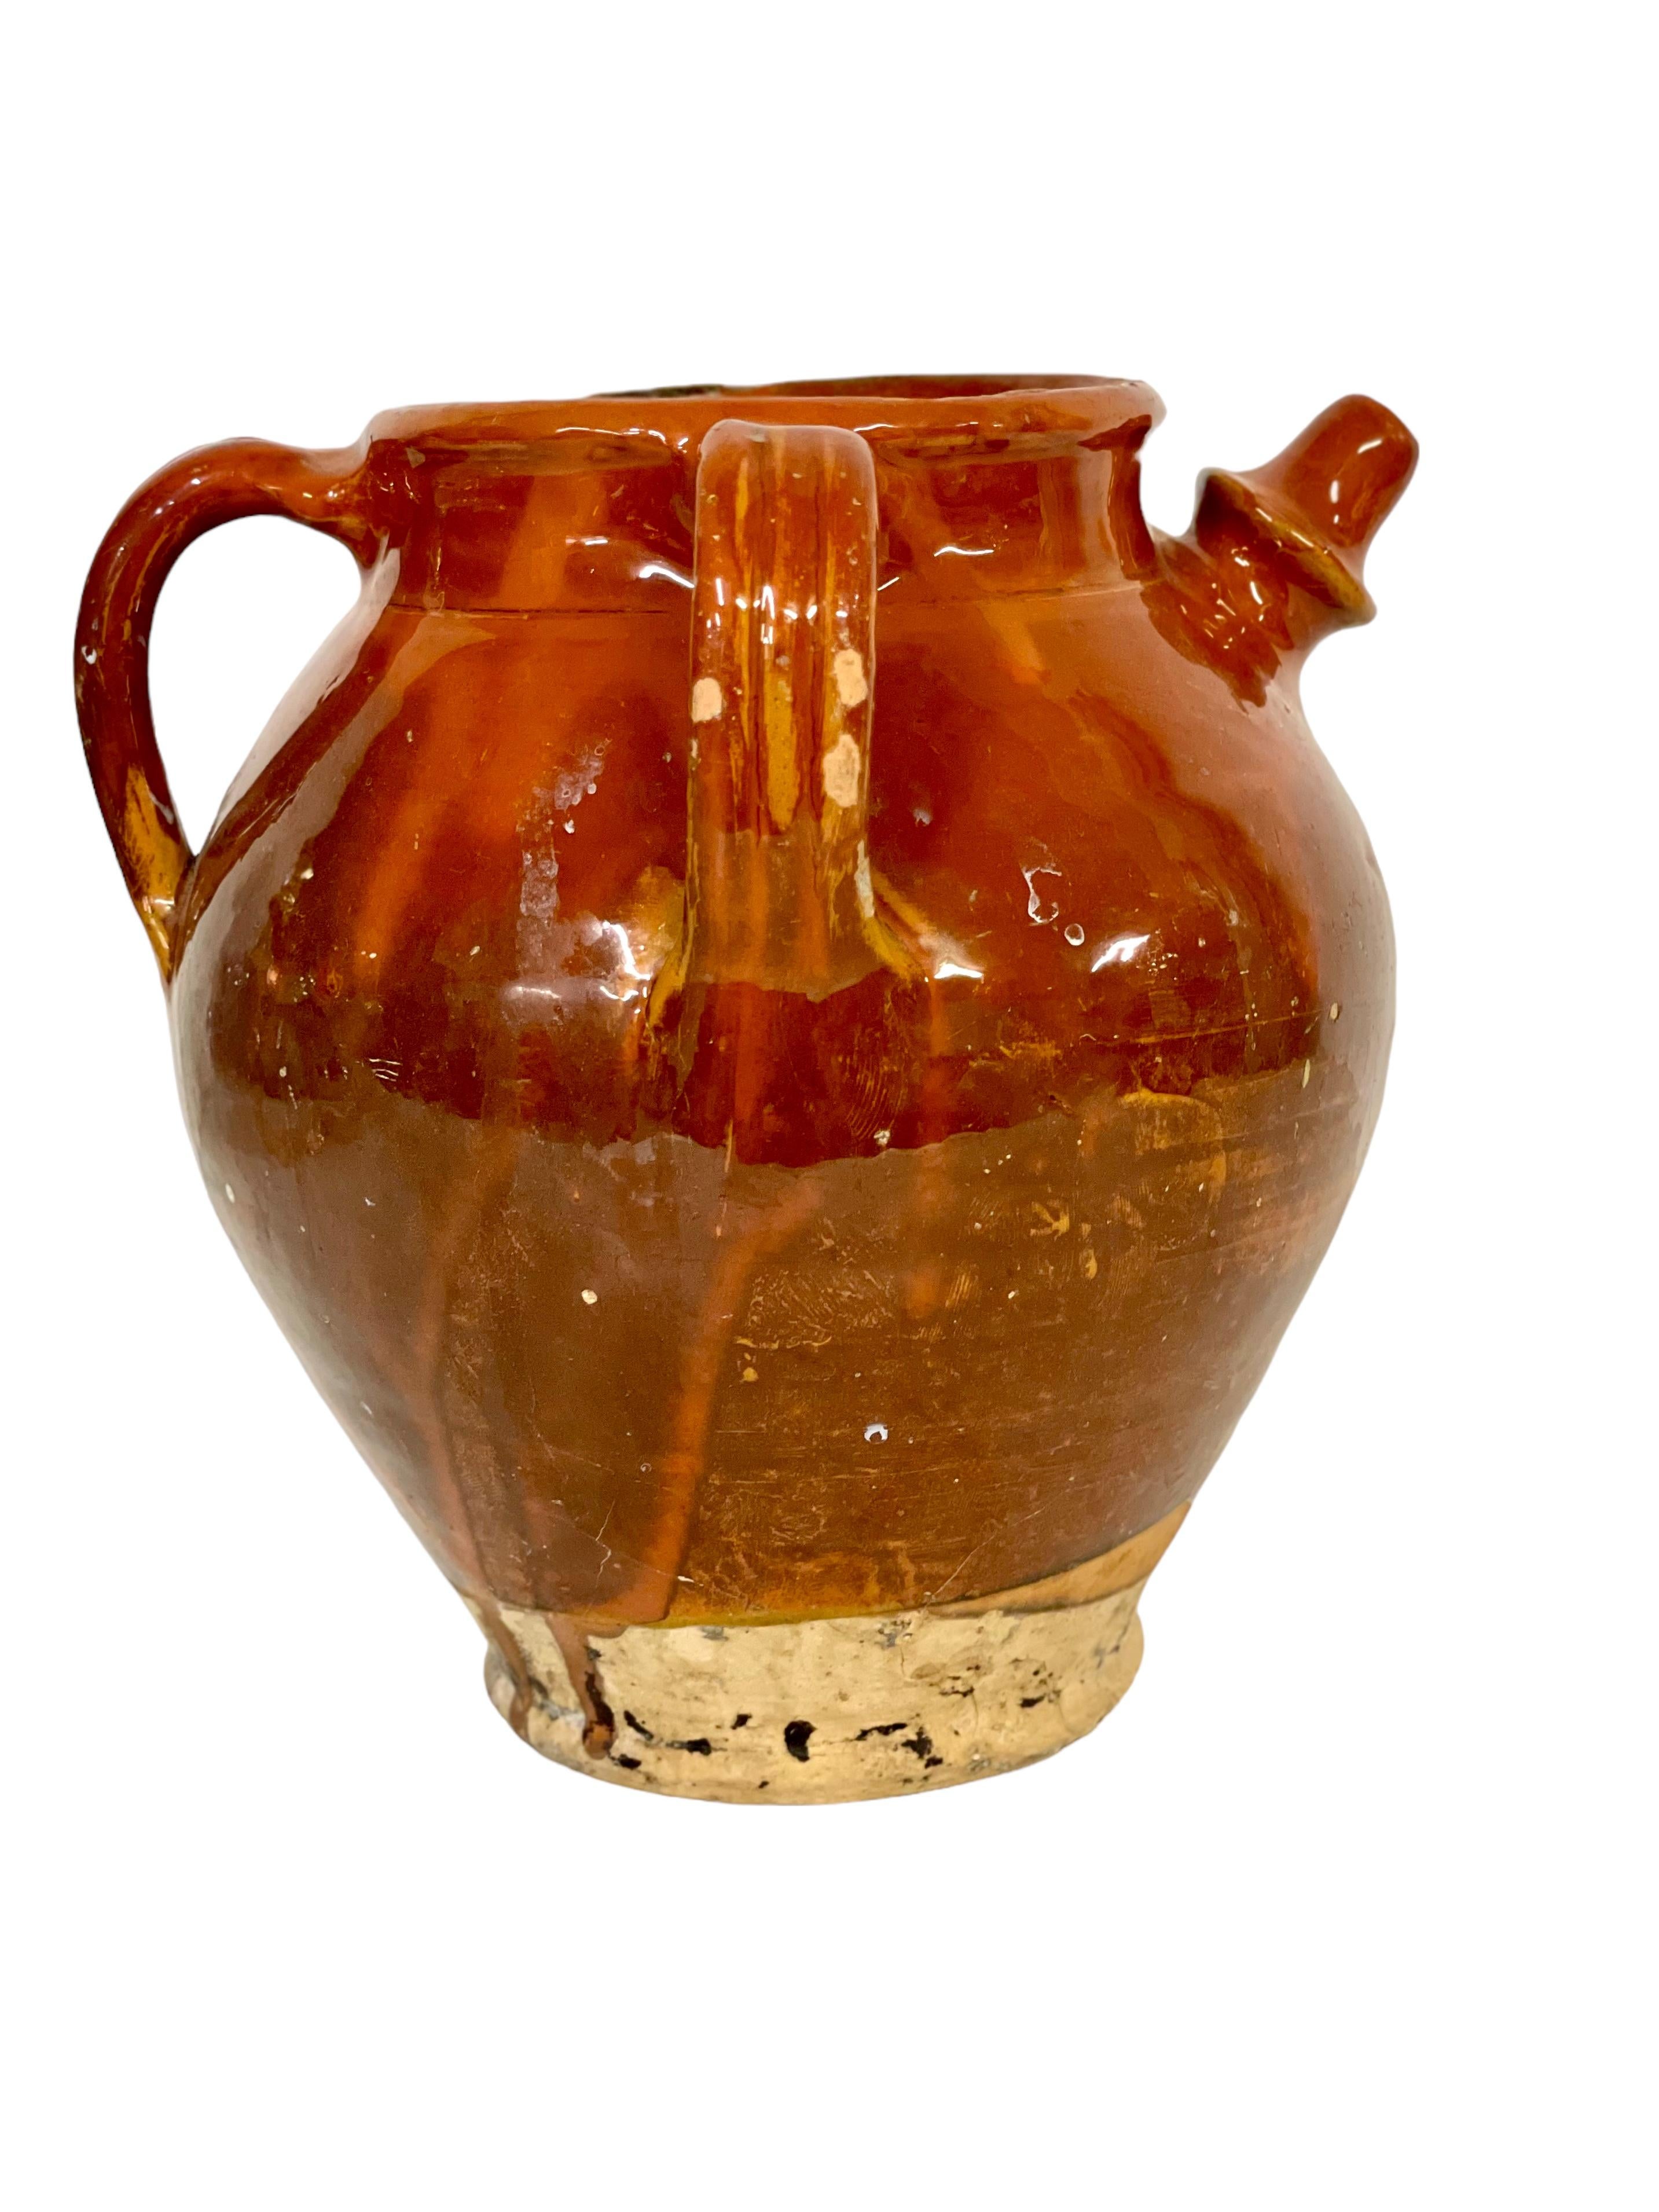 French 19th C. Glazed Pouring Jug from Dordogne Region of France For Sale